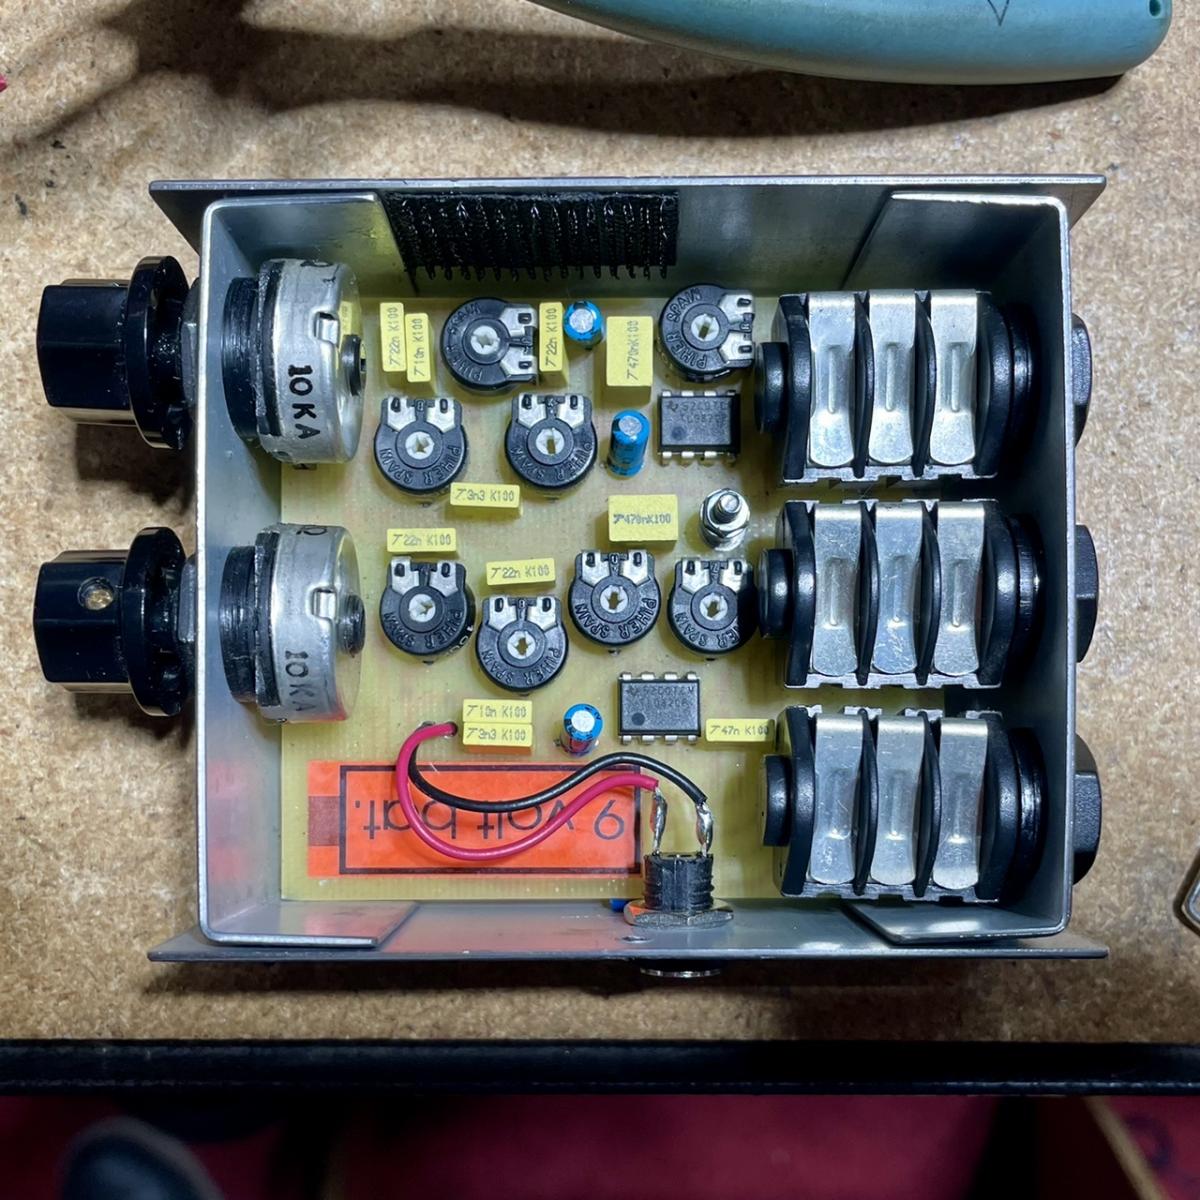 Interior view of K&K bass preamp